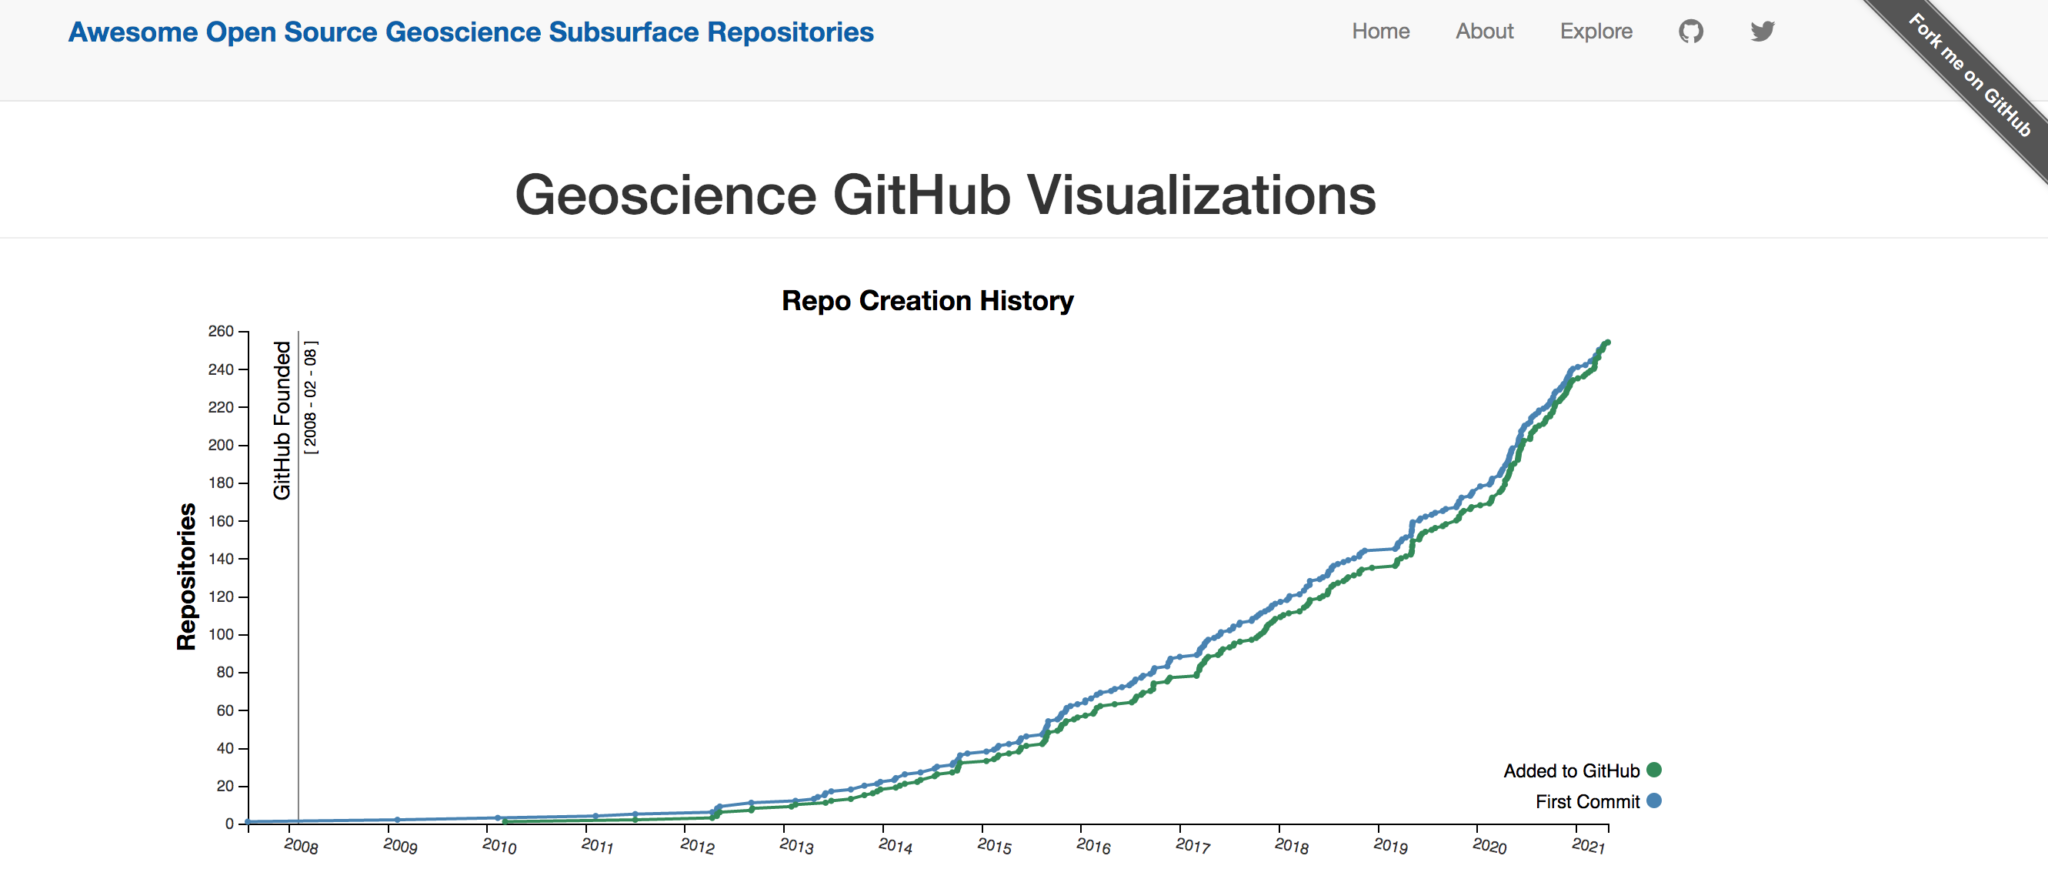 "Repository creation statistics over time showing more repos since 2009"